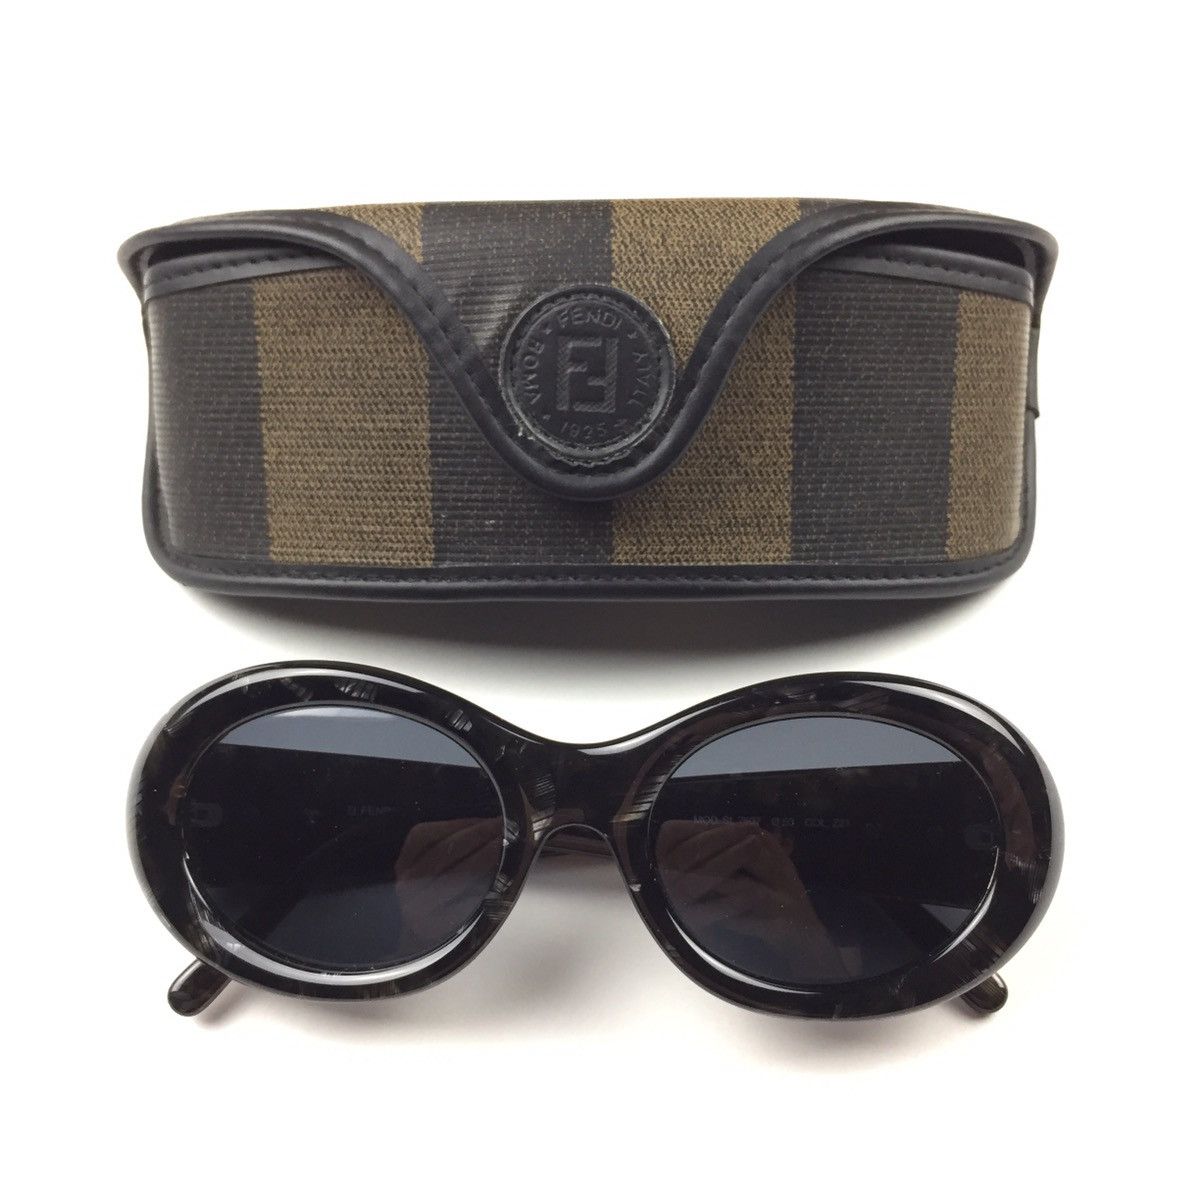 Fendi SL 7507 Vintage Sunglasses Made in Italy 90's New 